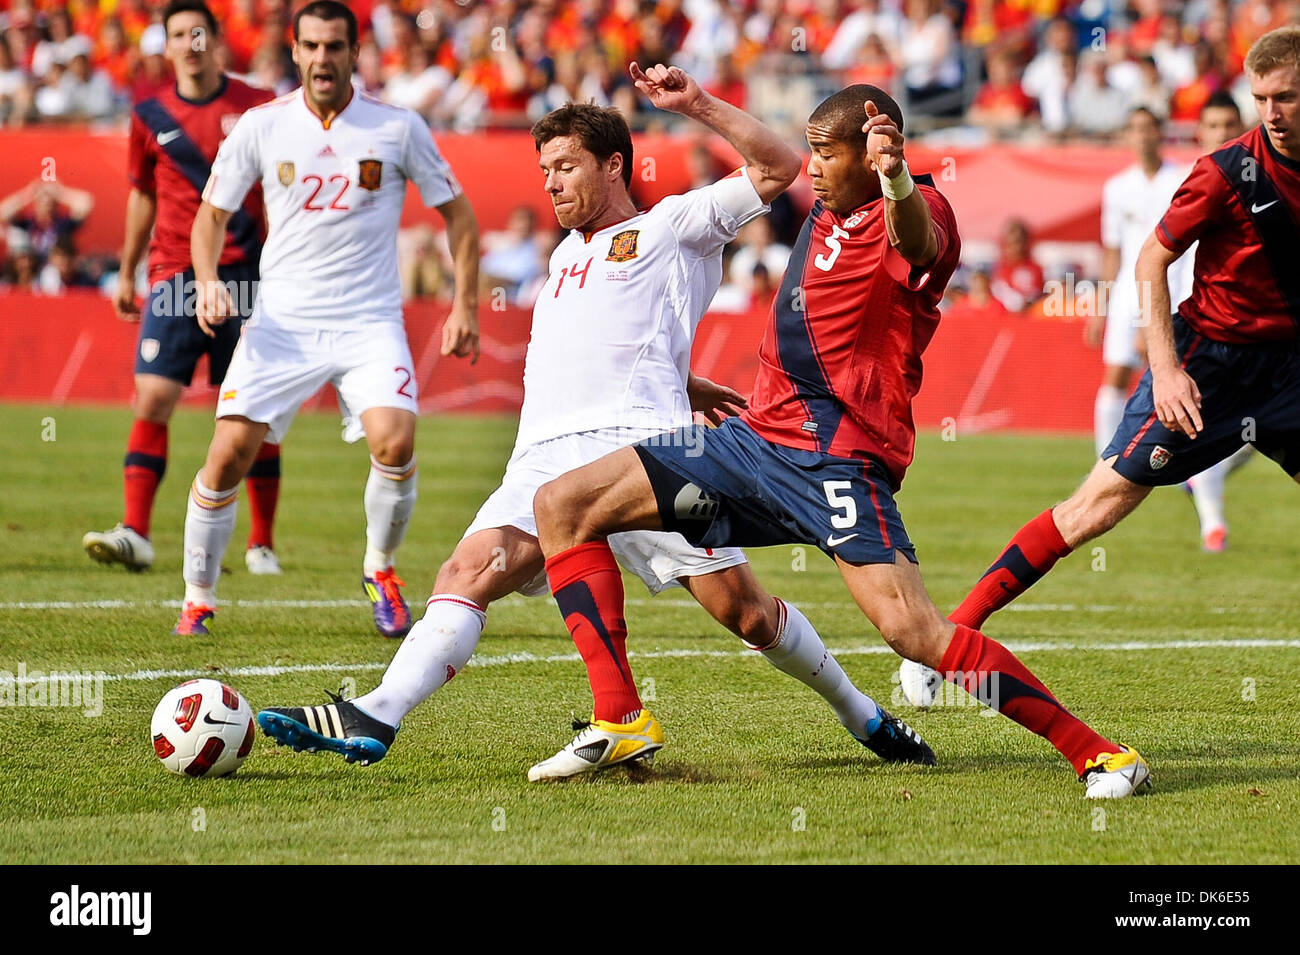 June 4, 2011 - Foxborough, Massachusetts, U.S - Spain midfielder Xabi Alonso (14) and USA defender Oguchi Onyewu (5) battle for the ball in the US 18 yard box. Spain defeats the United States in the international friendly 4 - 0 at Gillette Stadium. (Credit Image: © Geoff Bolte/Southcreek Global/ZUMAPRESS.com) Stock Photo